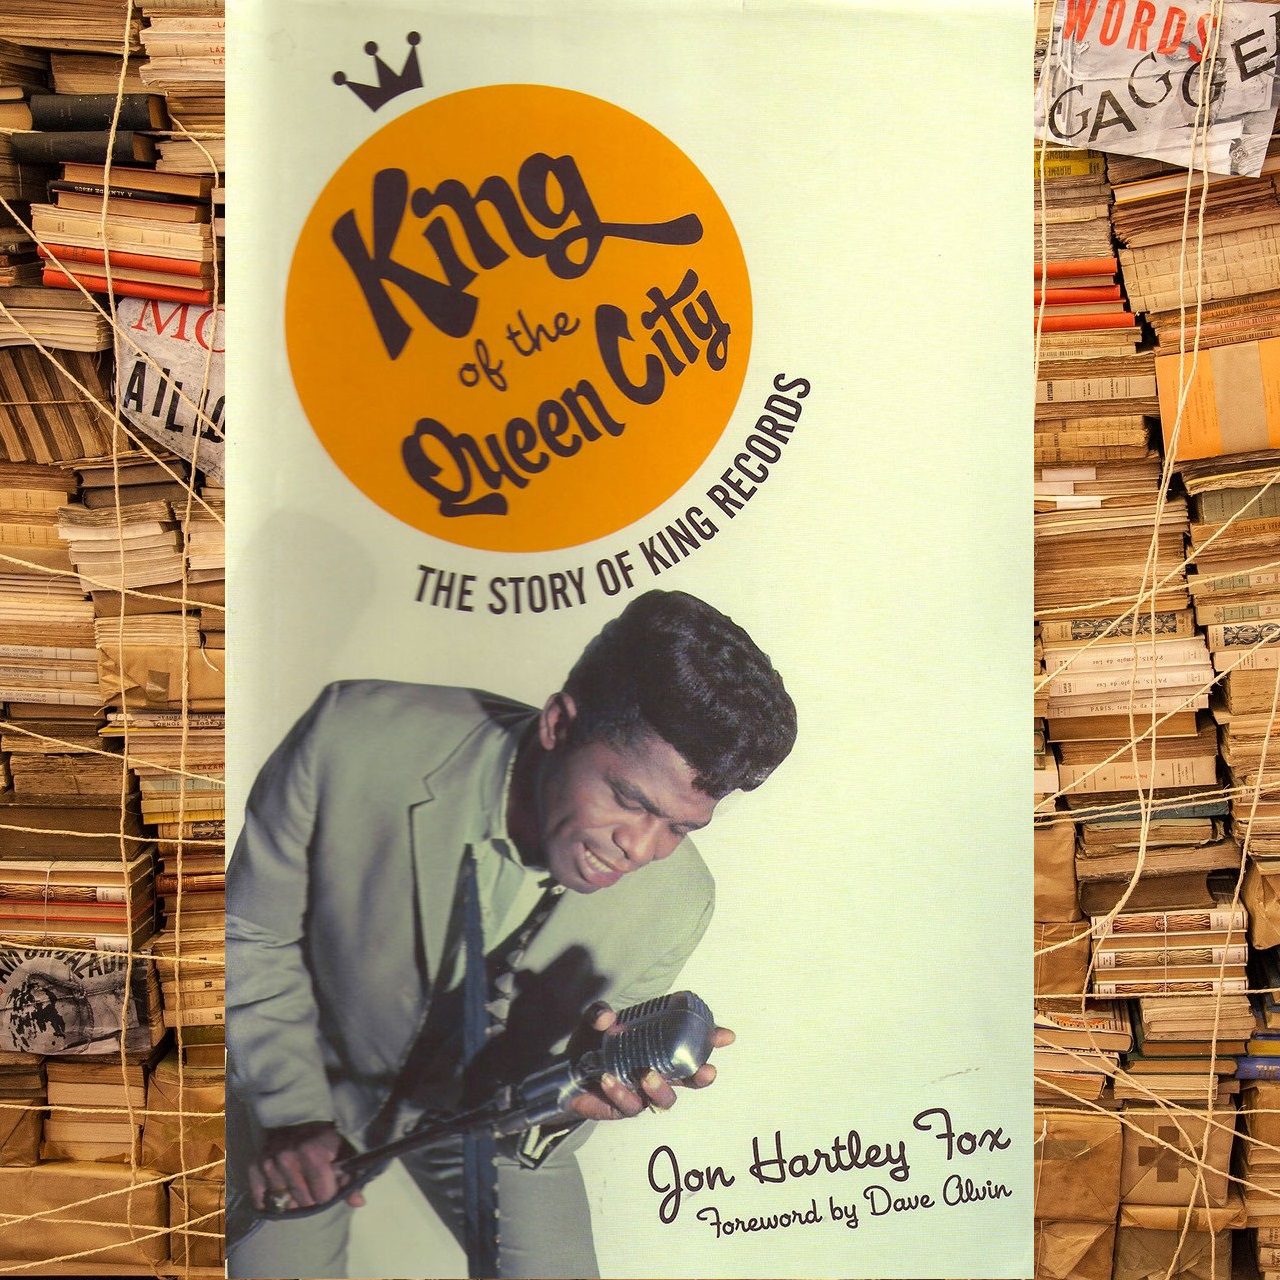 King Of The Queen City. The Story Of King Records